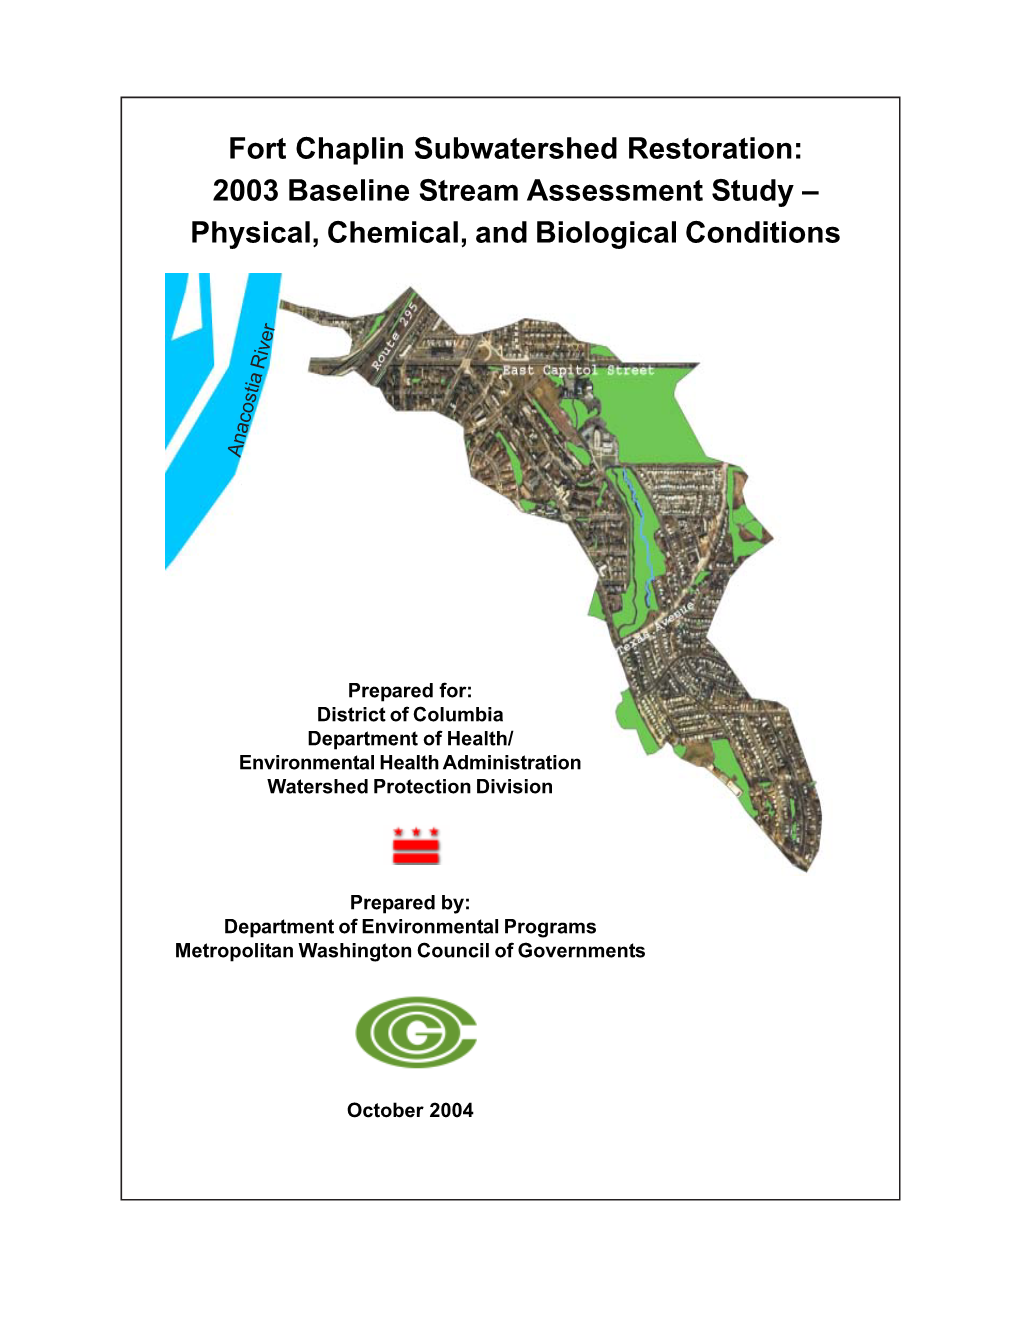 Fort Chaplin Subwatershed Restoration: 2003 Baseline Stream Assessment Study – Physical, Chemical, and Biological Conditions